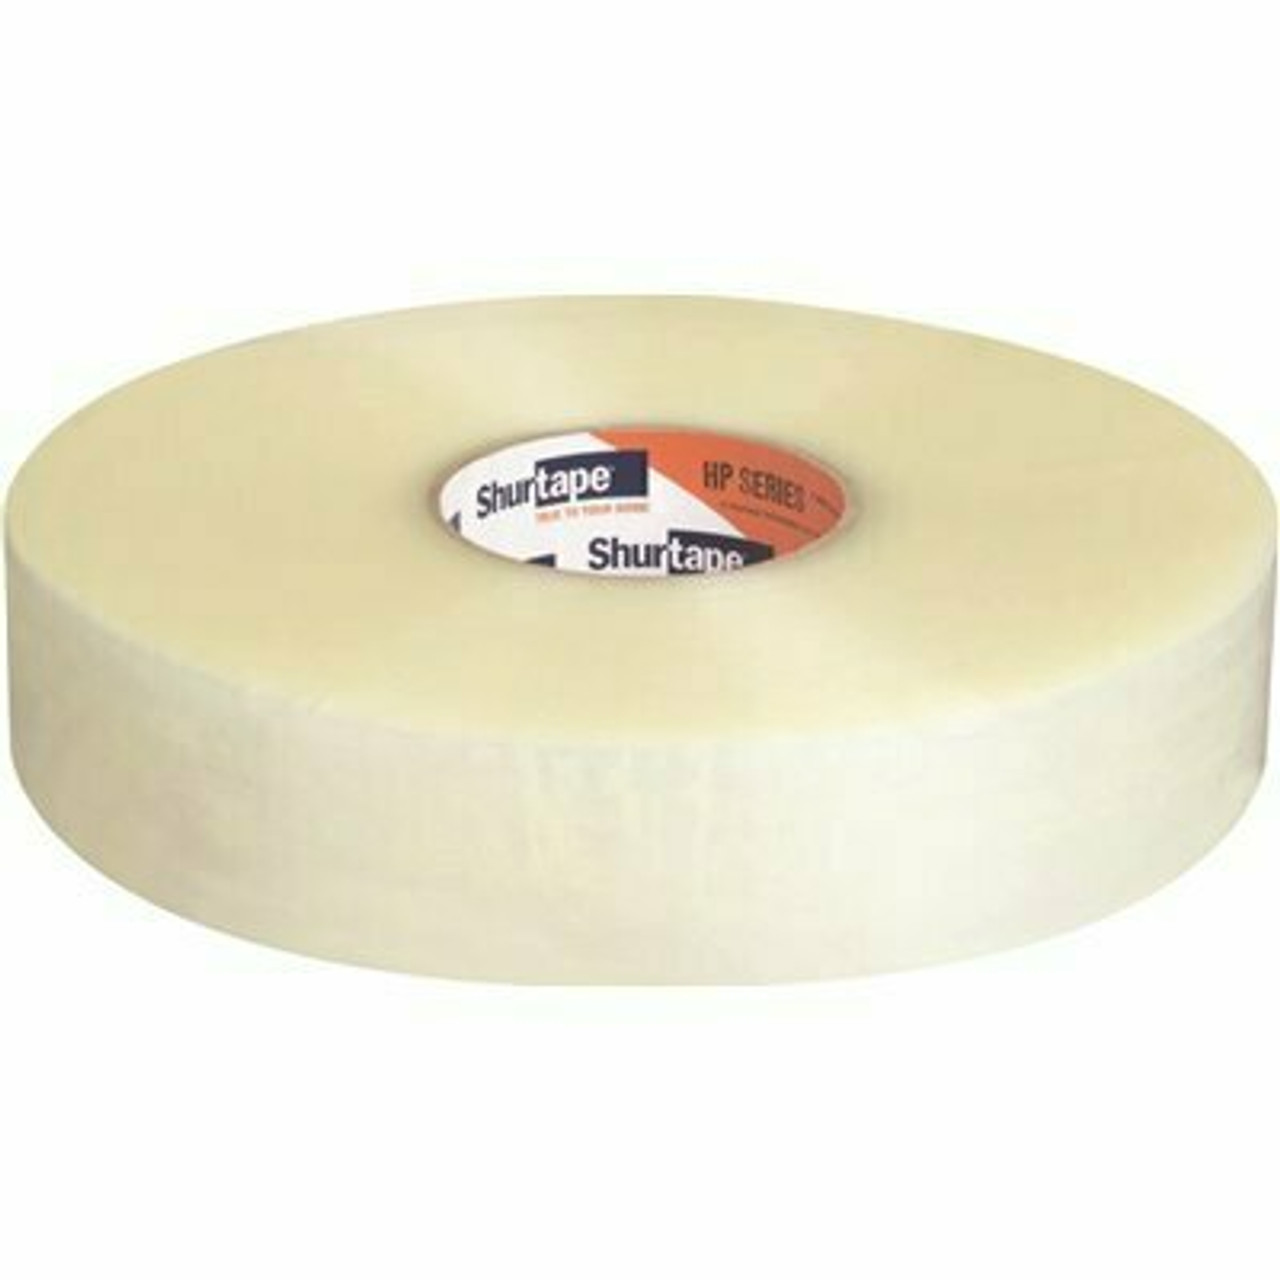 Shurtape Hp 235 2 Mils 48 Mm X 914 M Hot Melt Packaging Tape For Recycled Cartons, Clear (1-Case) (6-Roll)